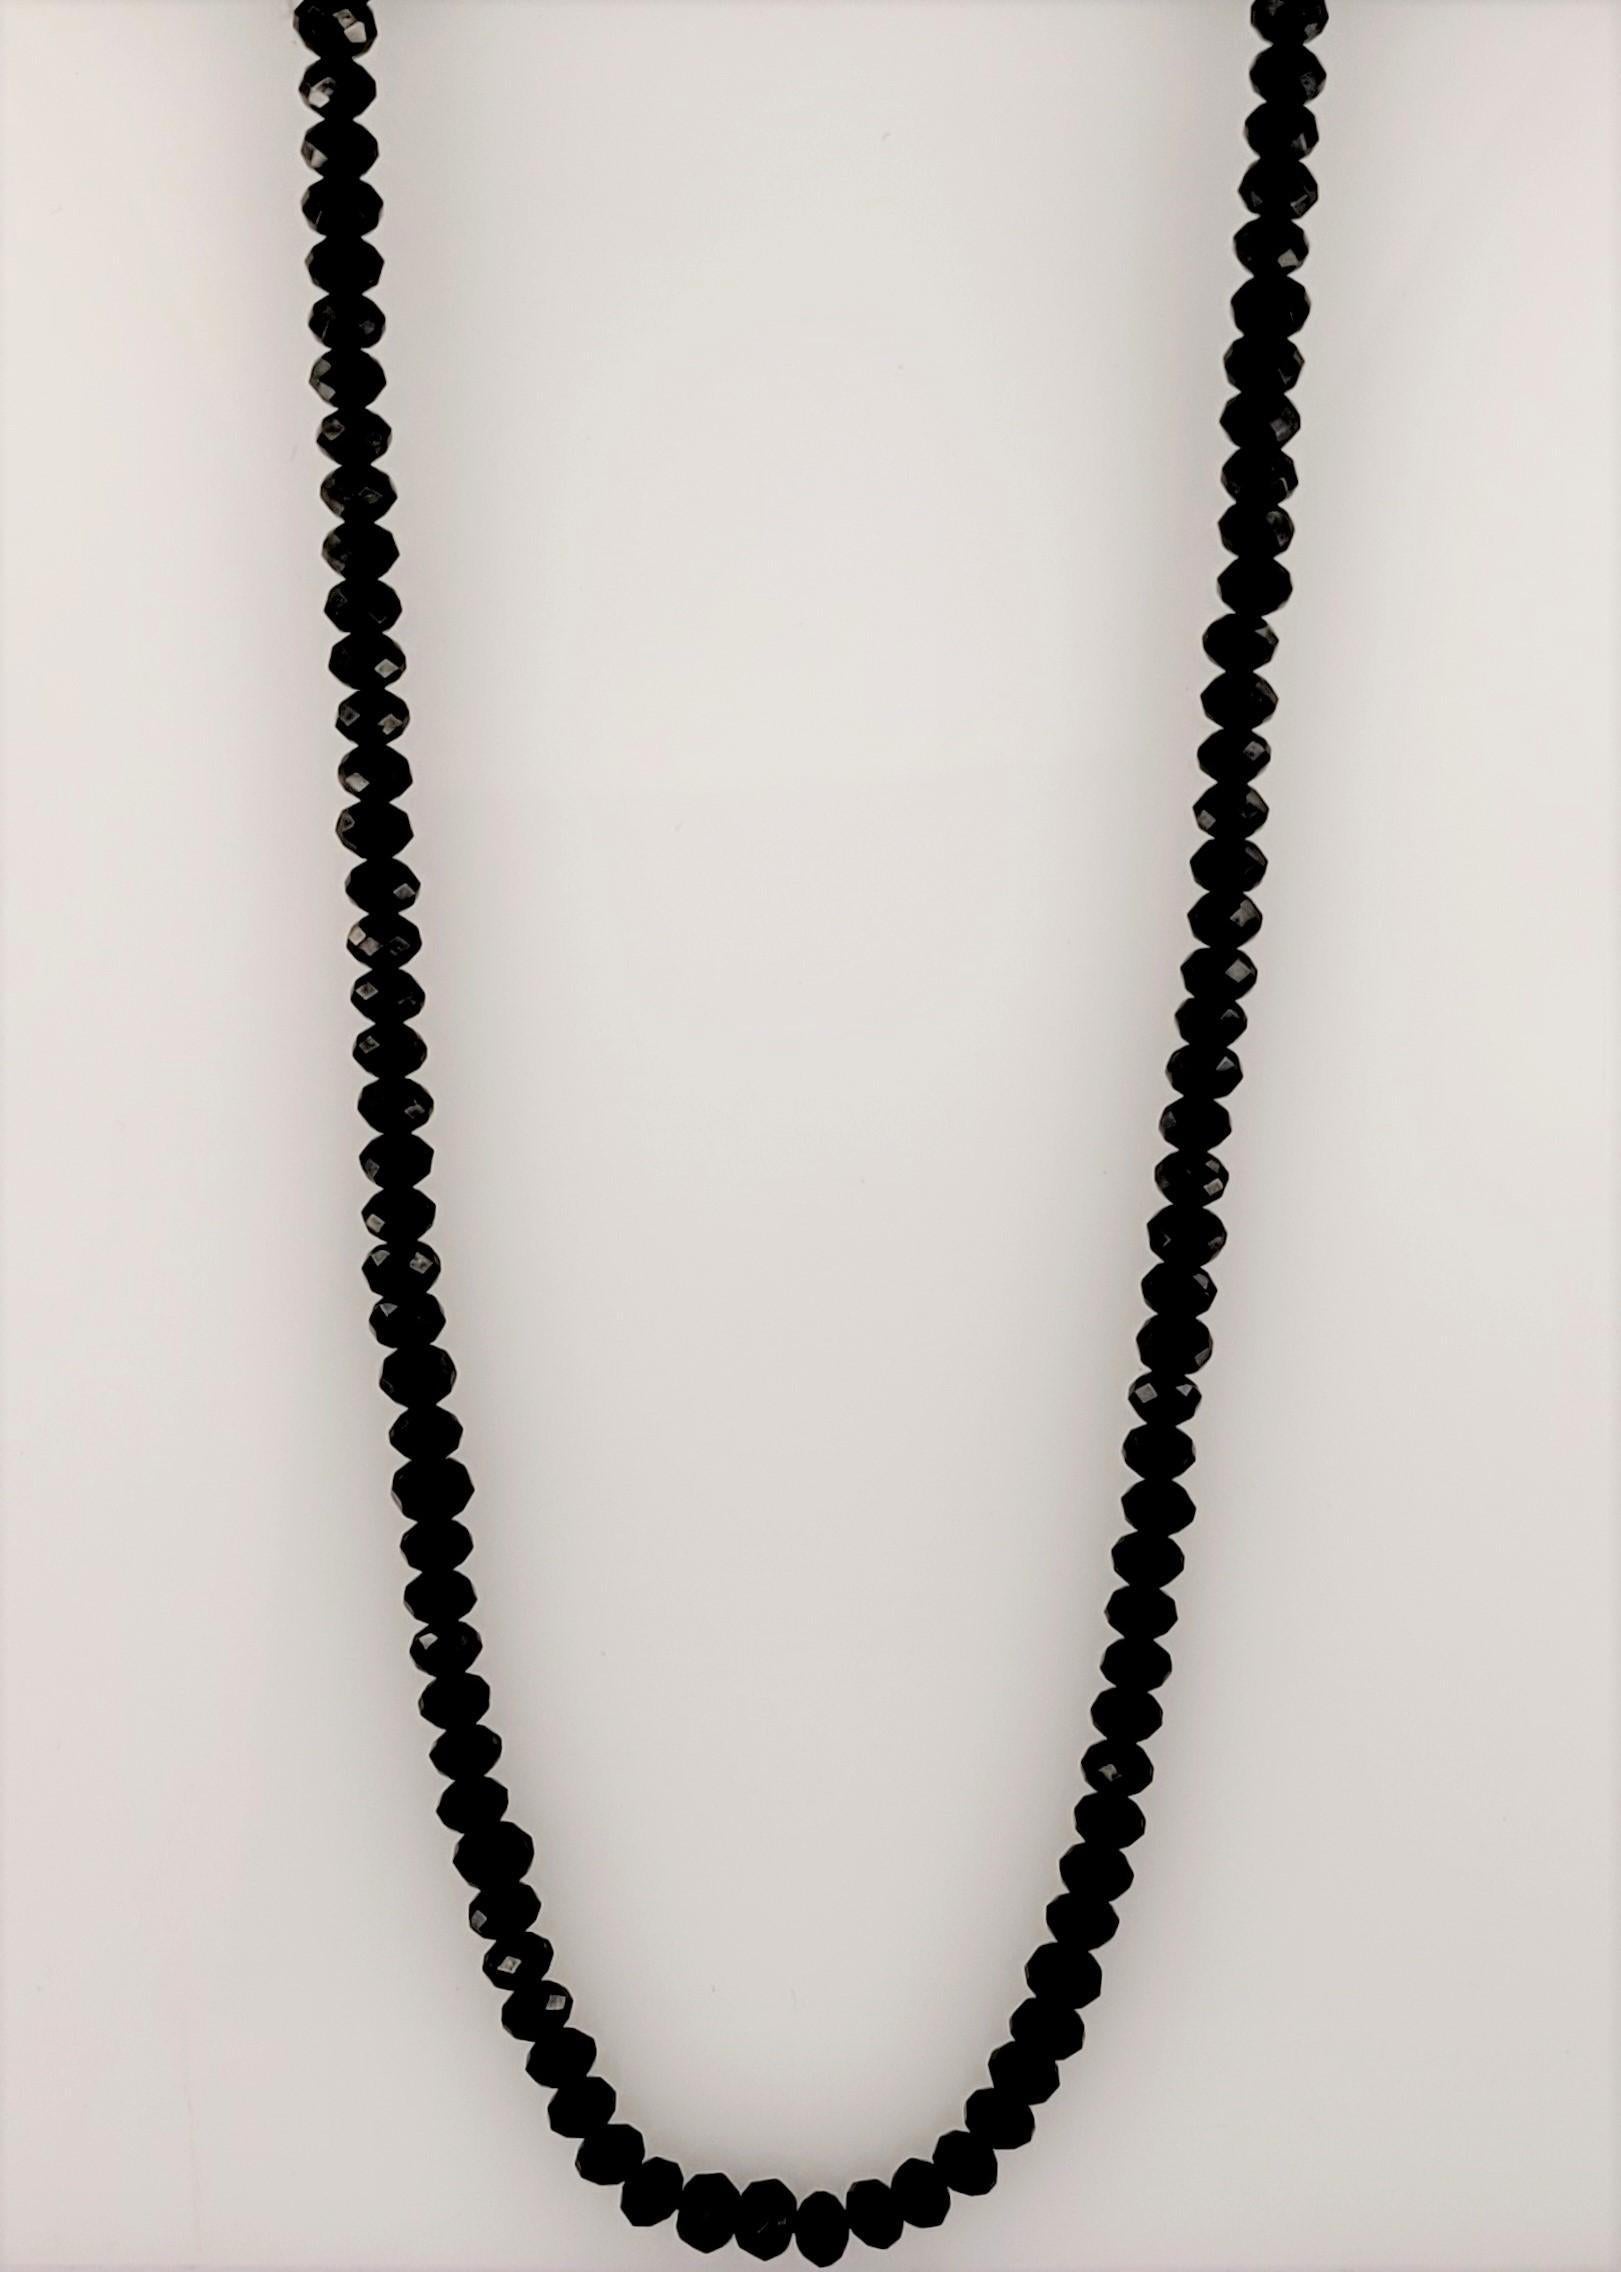 spiritual bead necklace with black spinel